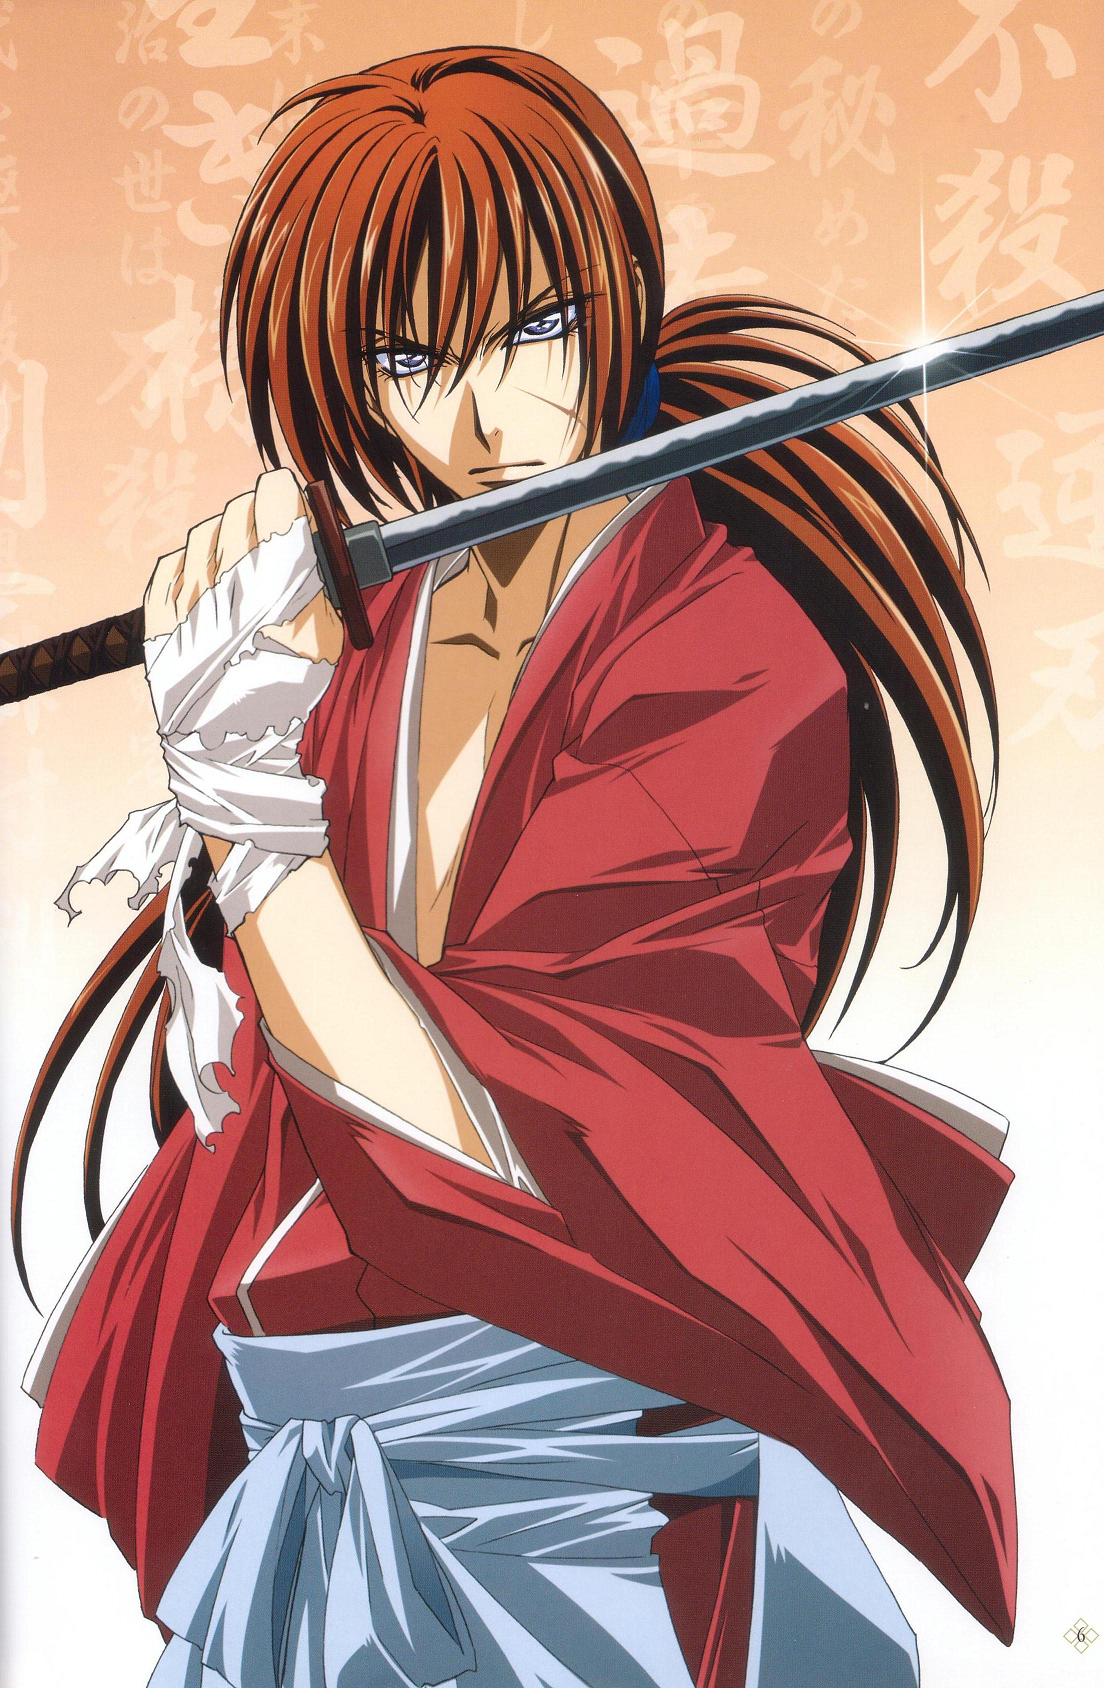 Rurouni Kenshin: The Main Characters, Ranked By Power